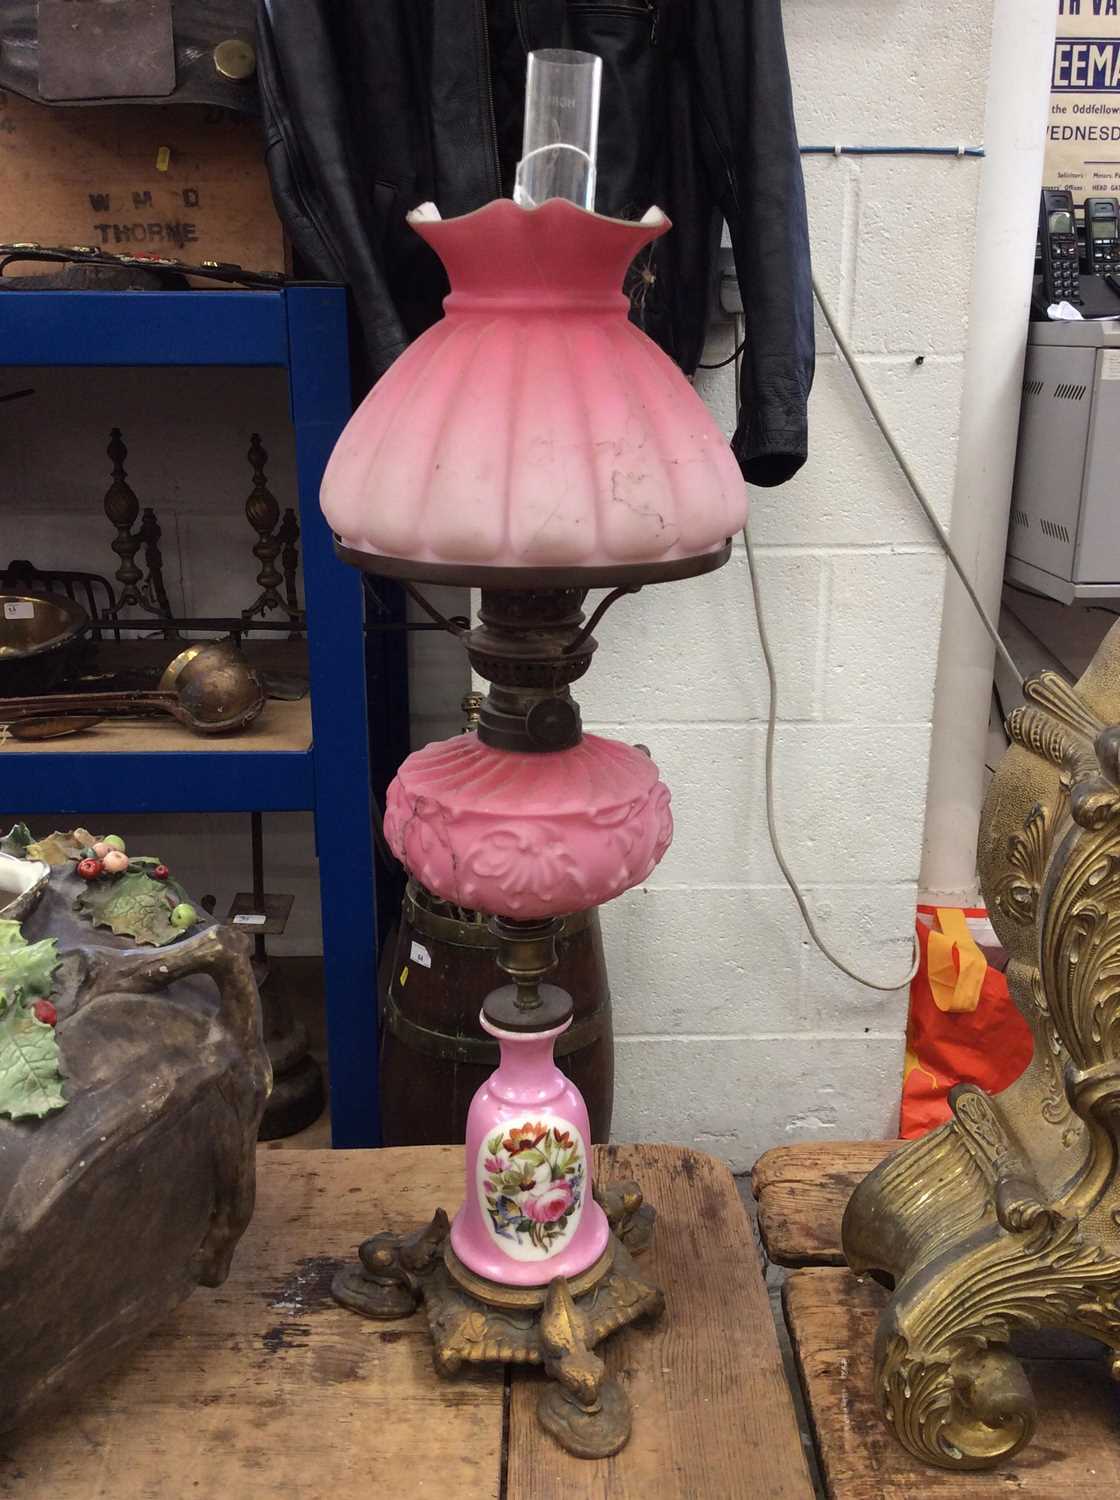 Lot 77 - 19th Century oil lamp with hand painted floral decoration, frosted pink glass reservoir and shade